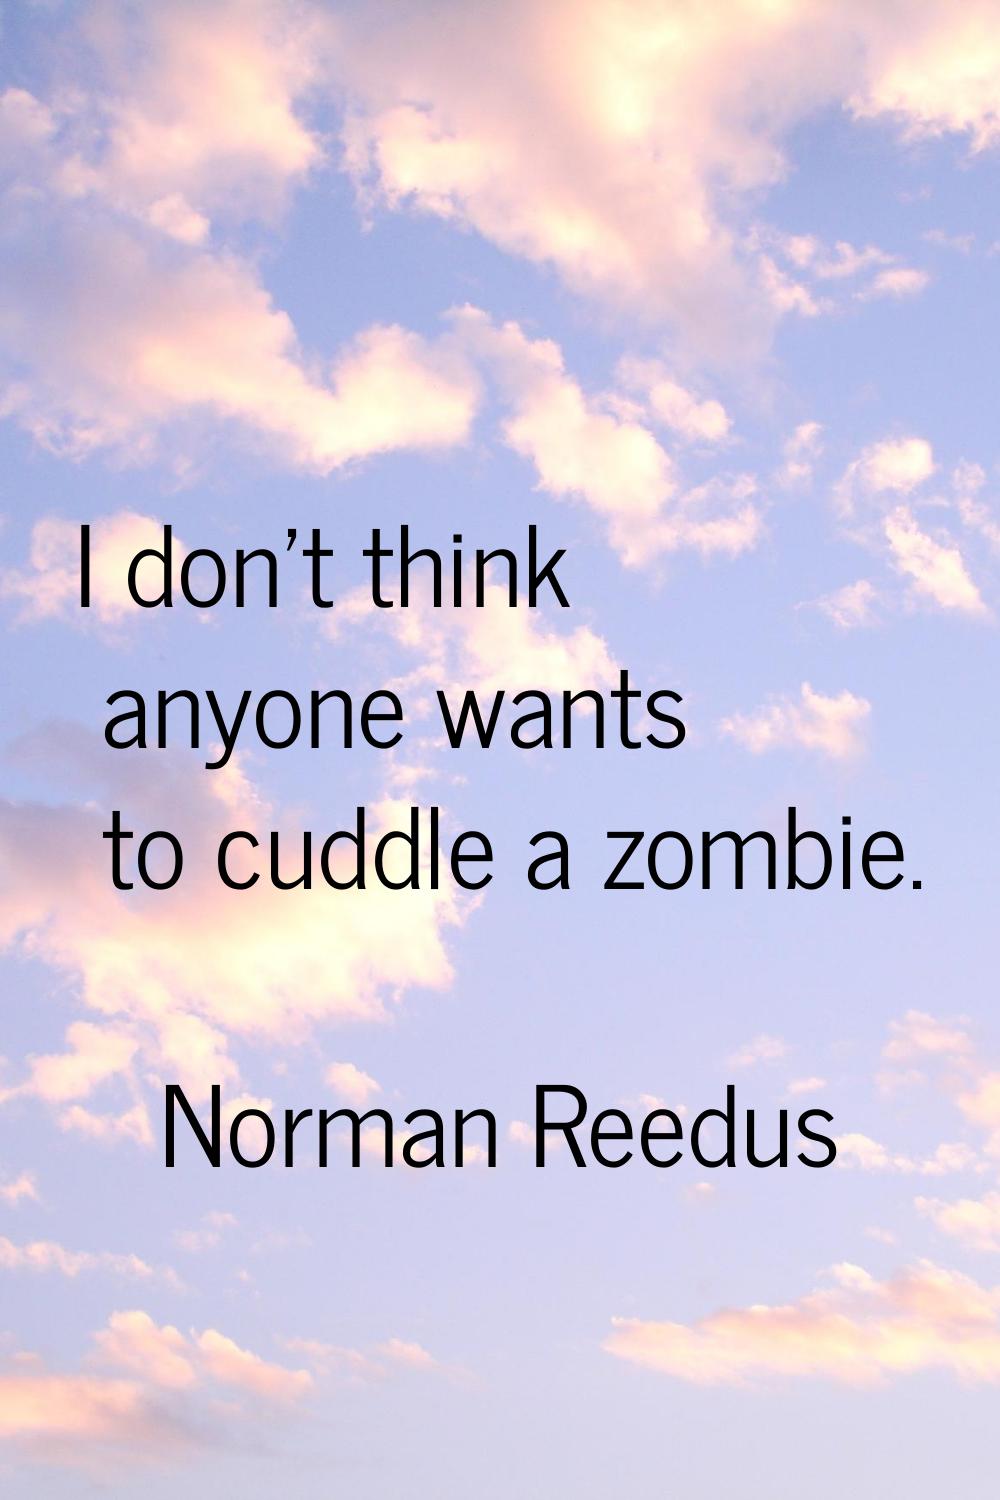 I don't think anyone wants to cuddle a zombie.